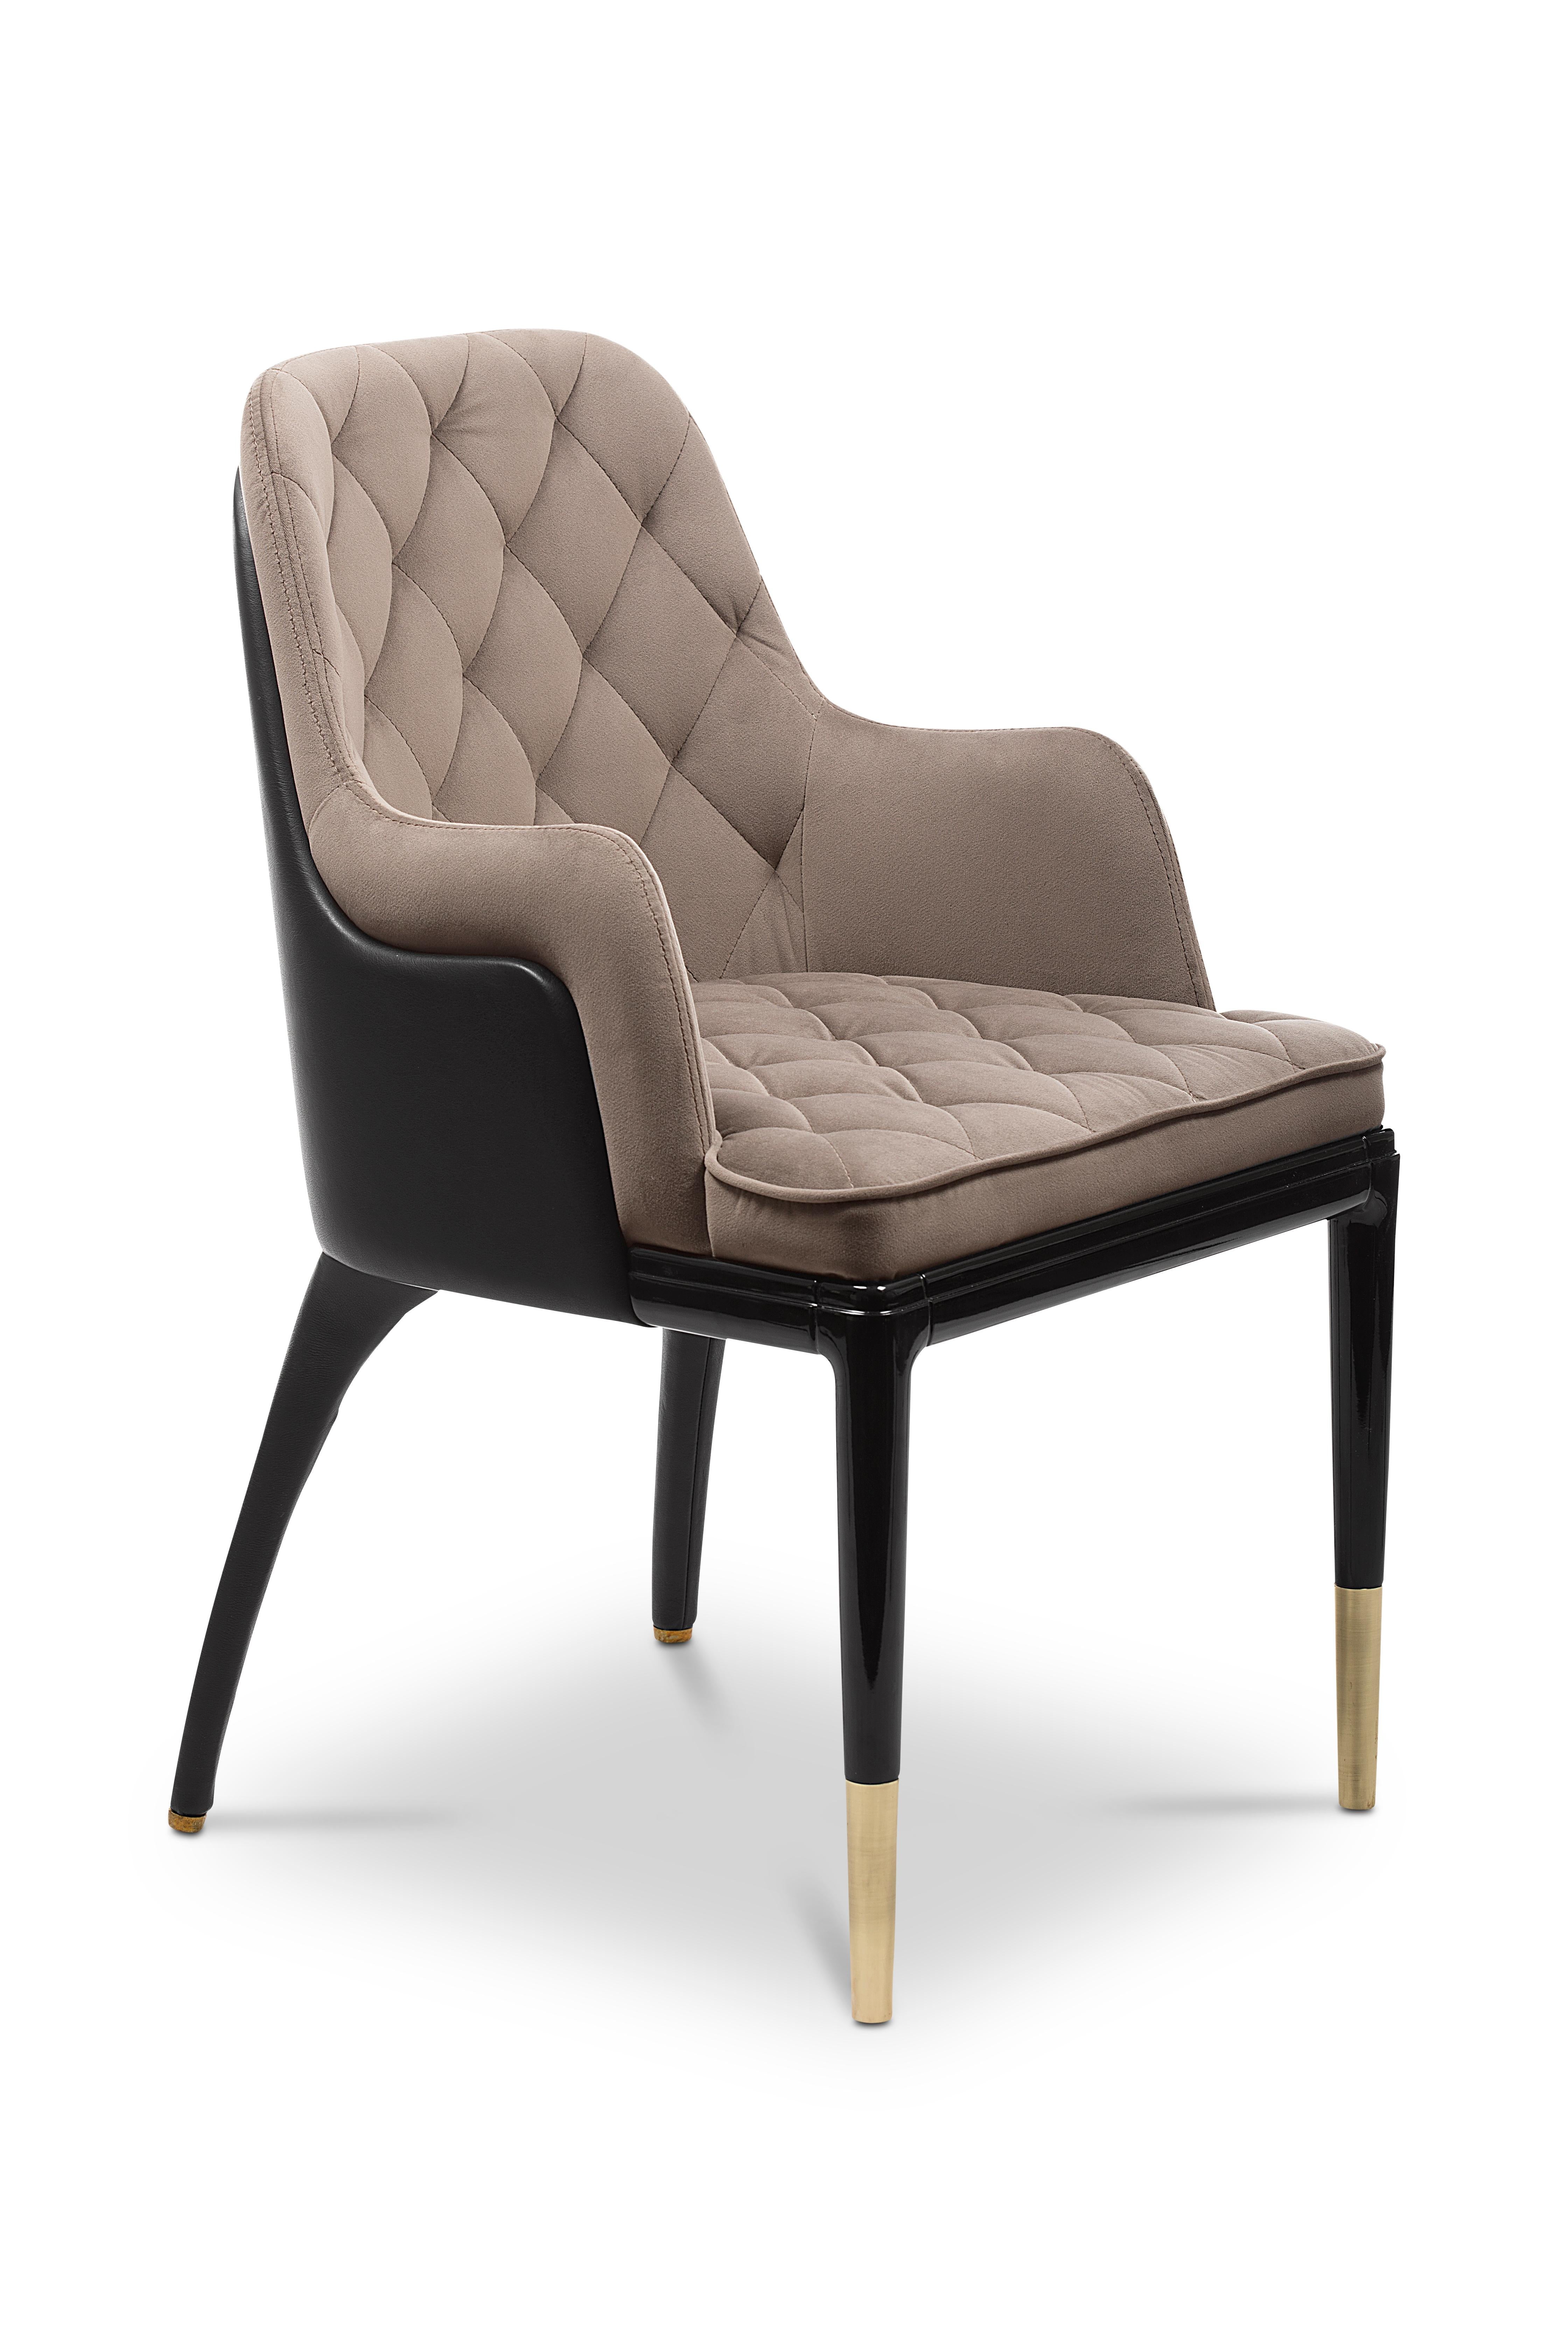 Modern Charla in Beige Velvet with Brass Feet Dining Chair by Luxxu

A Modern Charla in Beige Velvet with Brass Feet Dining Chair by Luxxu with a velvet fabric, brass details, and lacquered wooded legs. This marvelous design is the perfect example